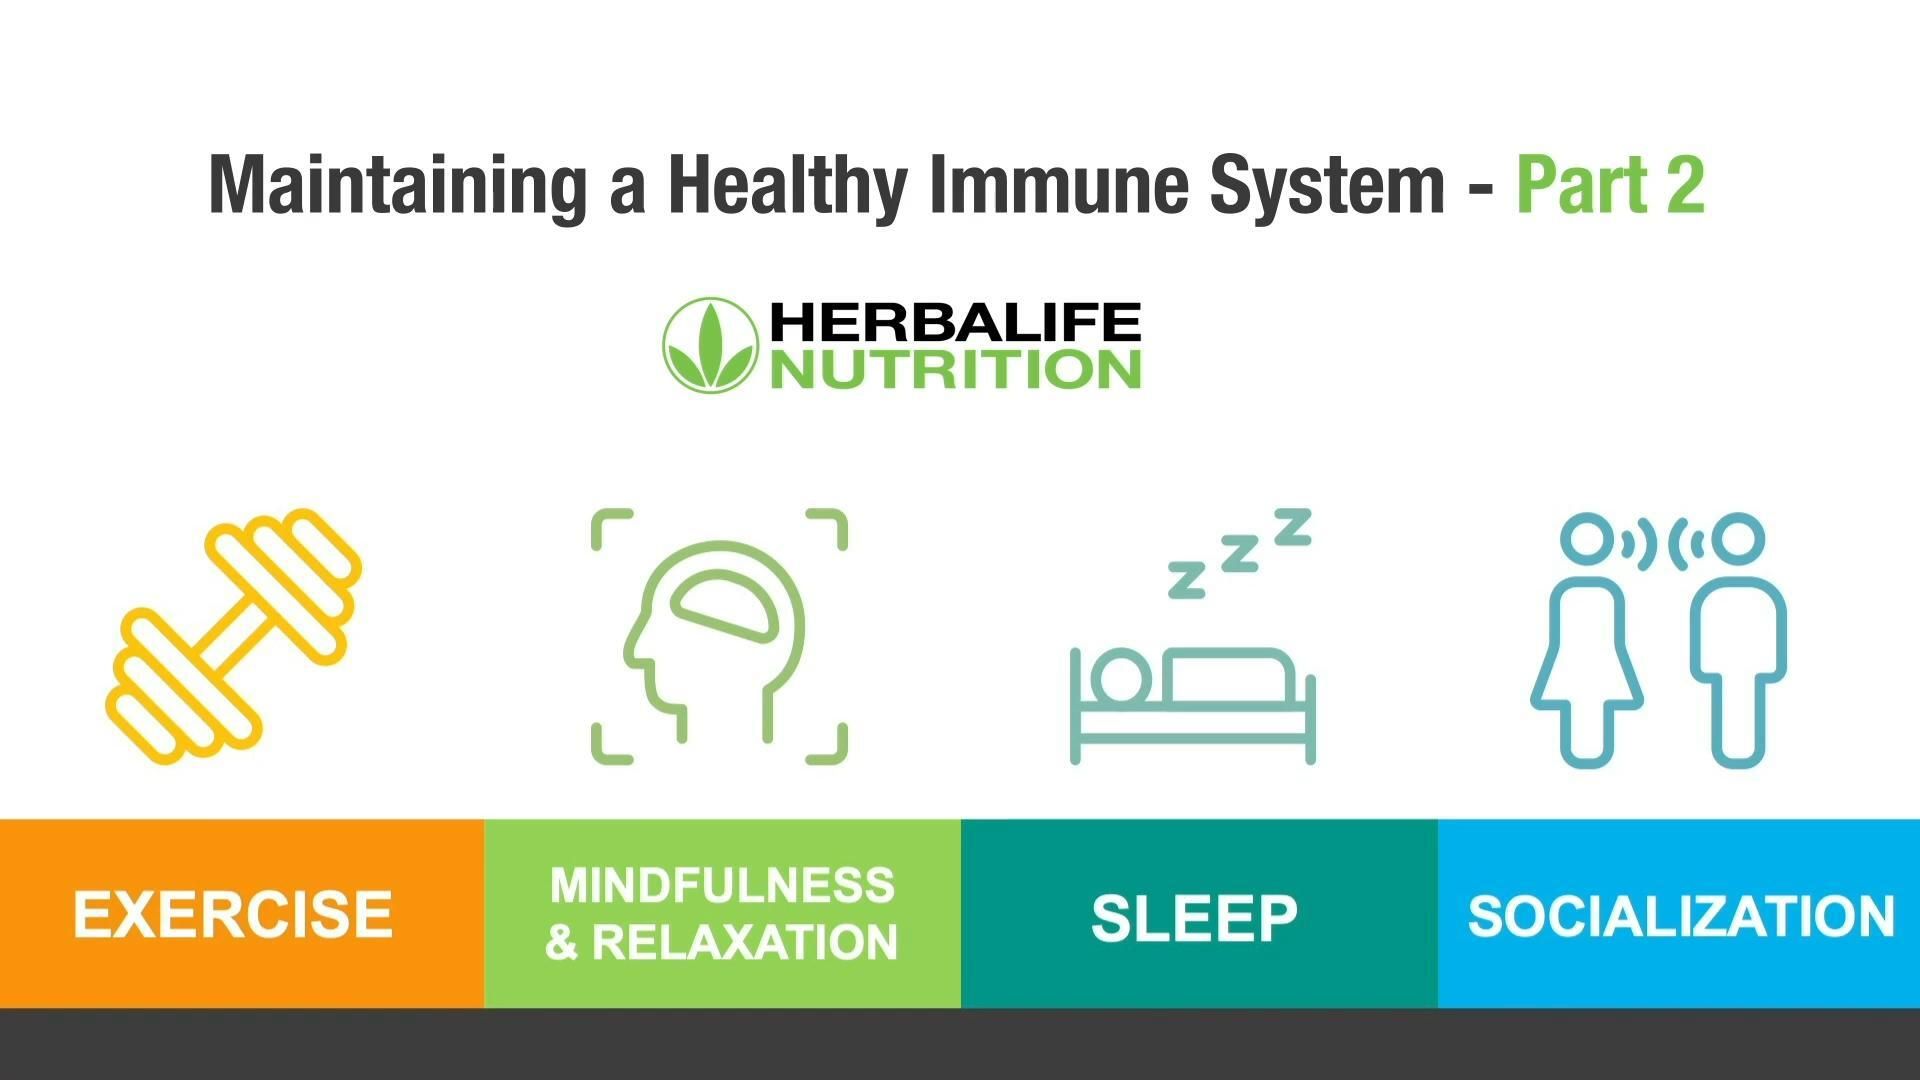 Maintaining a Healthy Immune System - Part 2